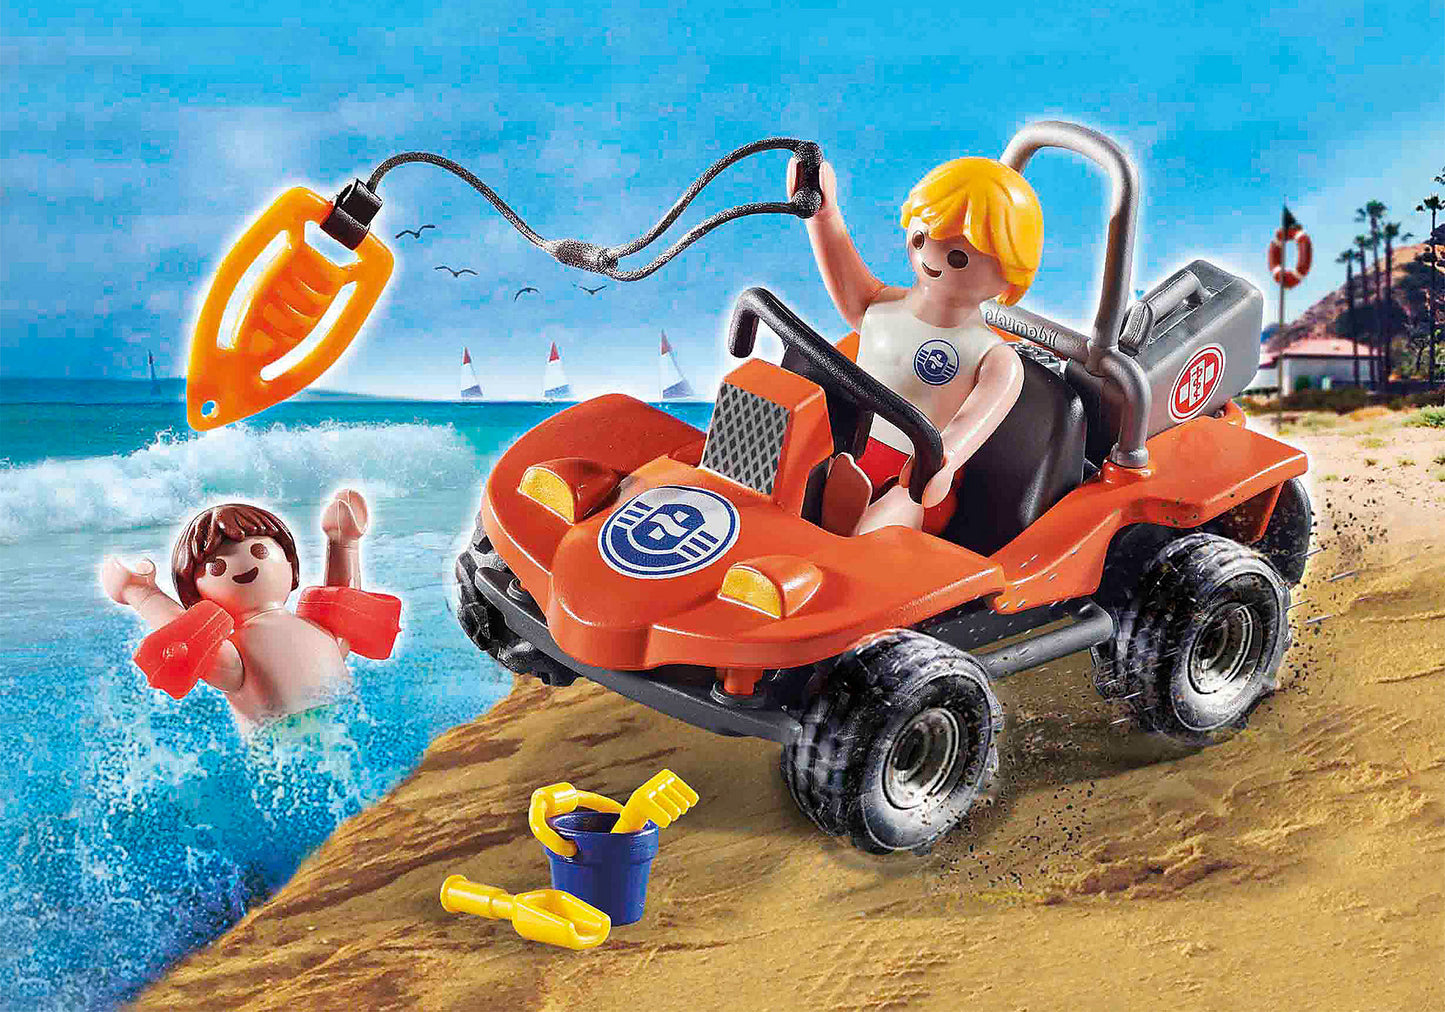 Rescue Action Lifeguard Beach Patrol Hobby And Toy Central 